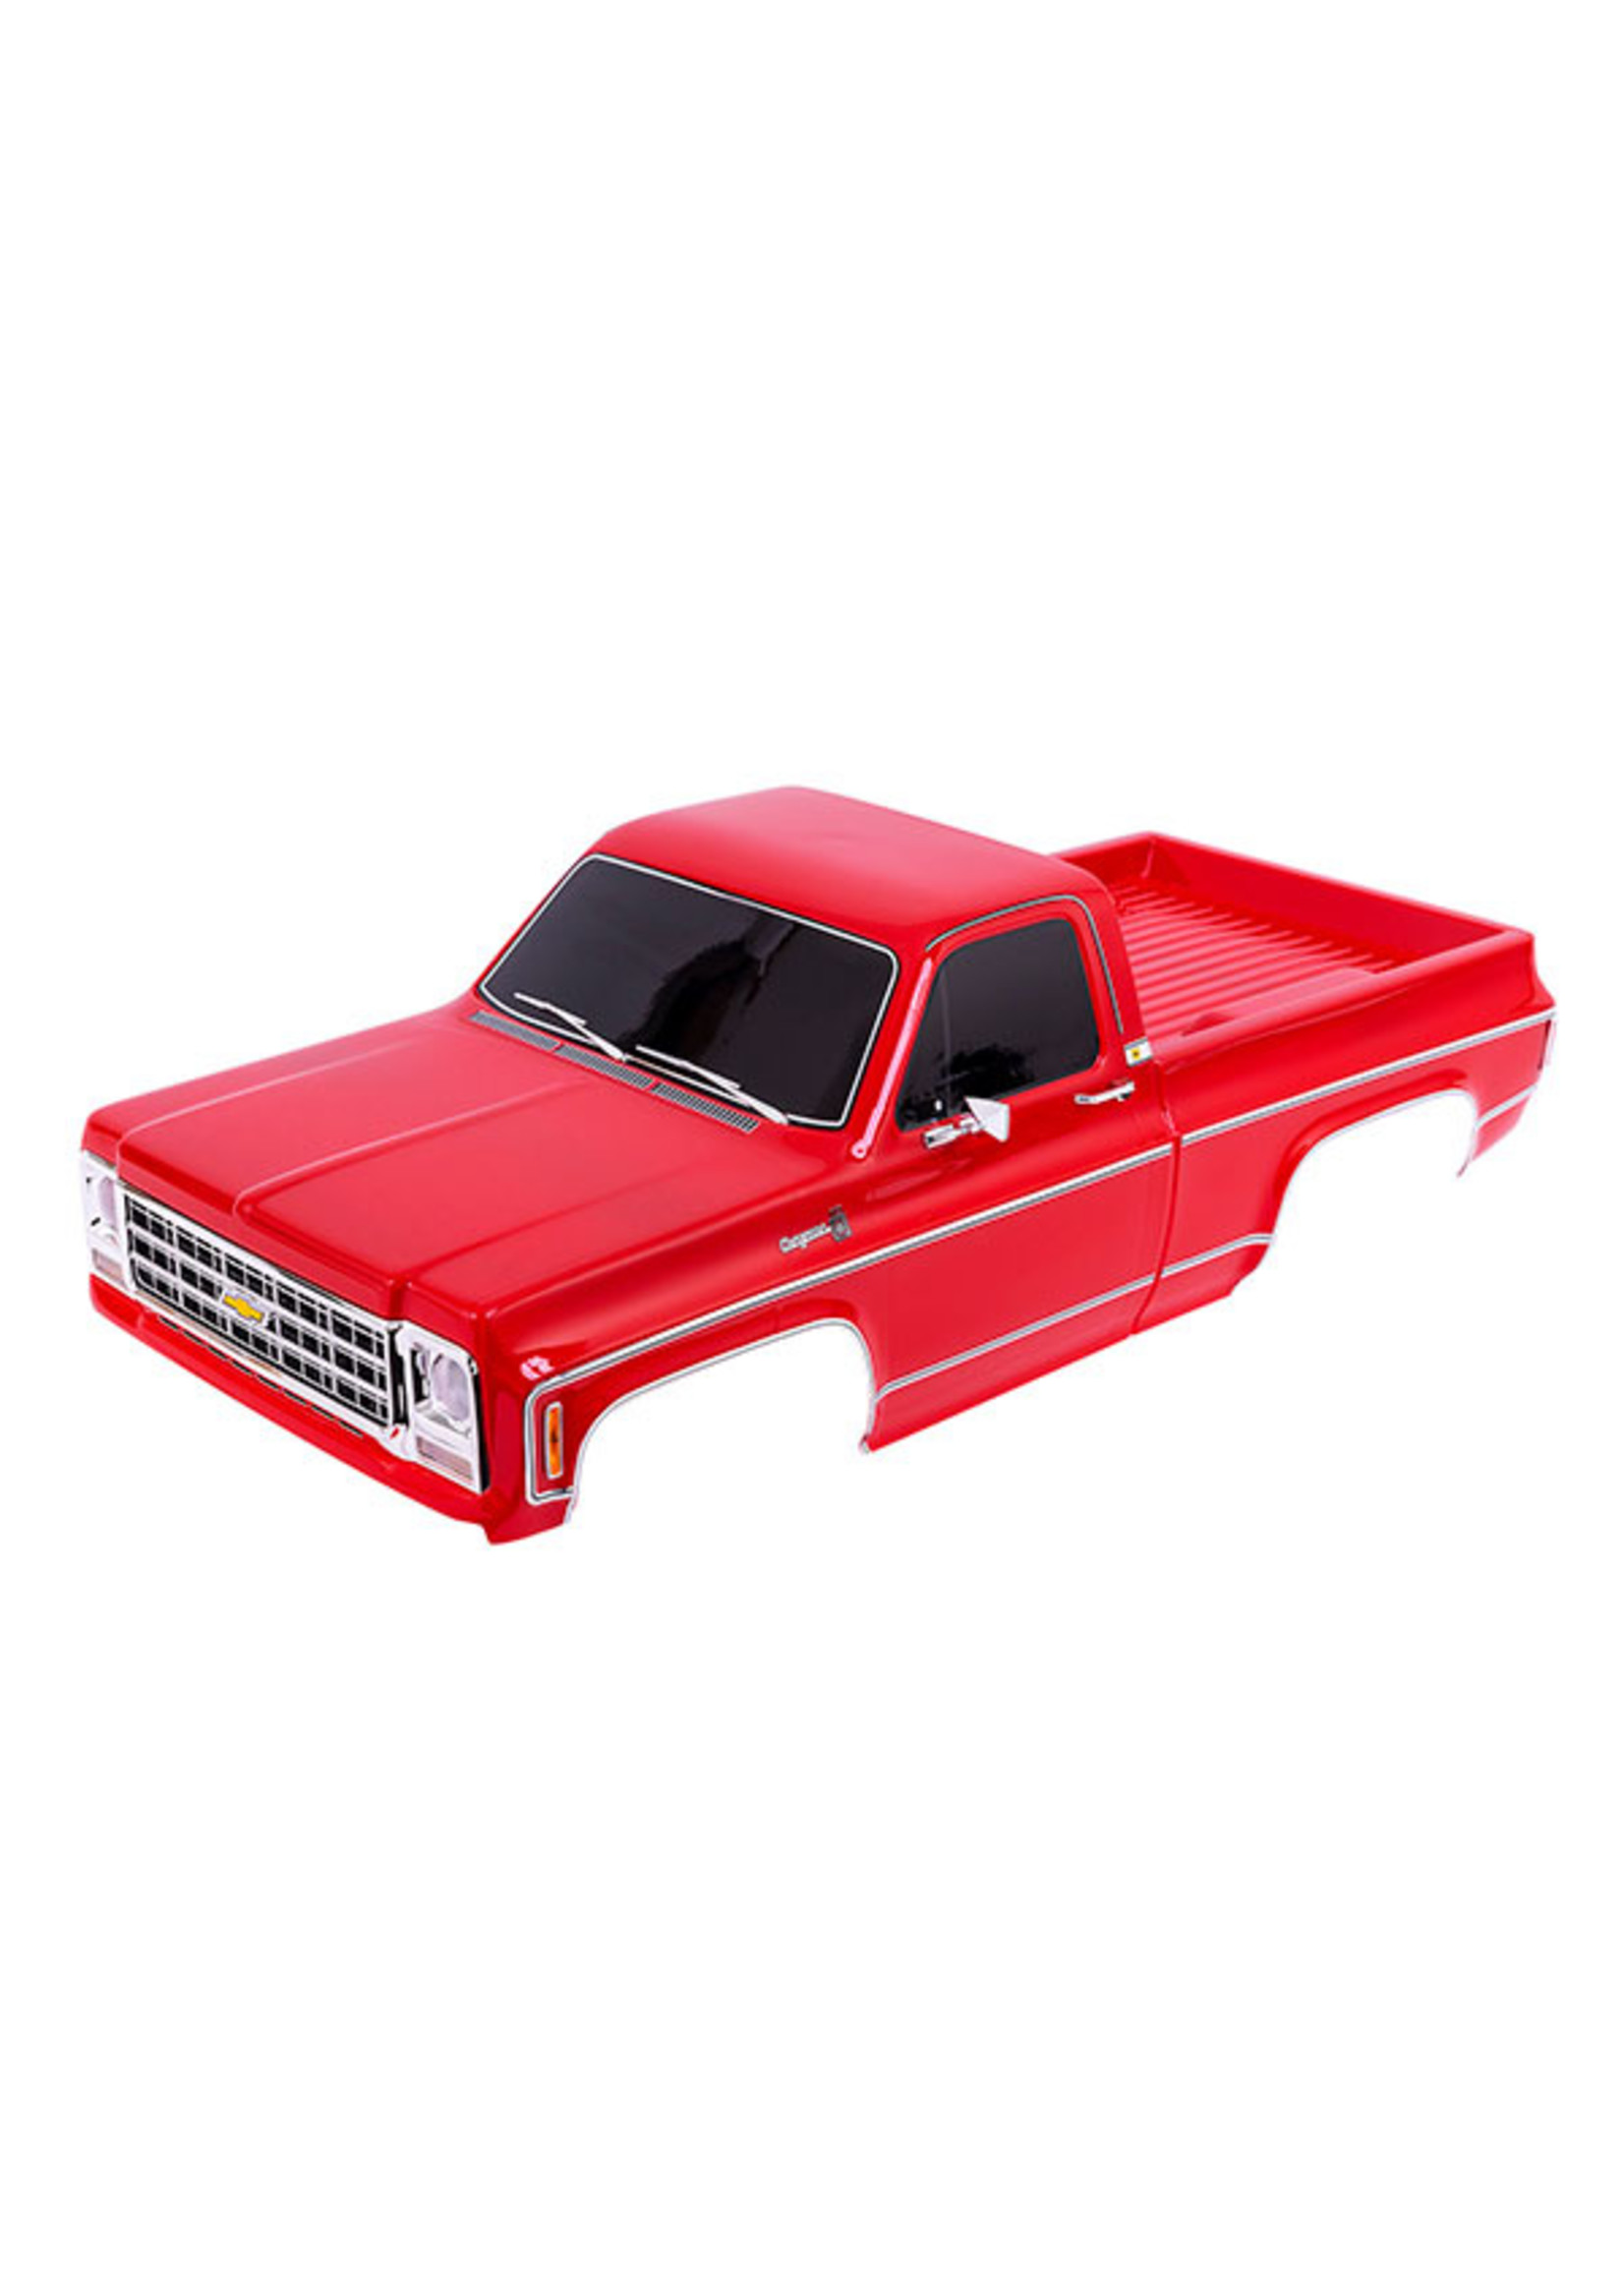 Traxxas 9212R - '79 K10 Truck Body, Complete - Red